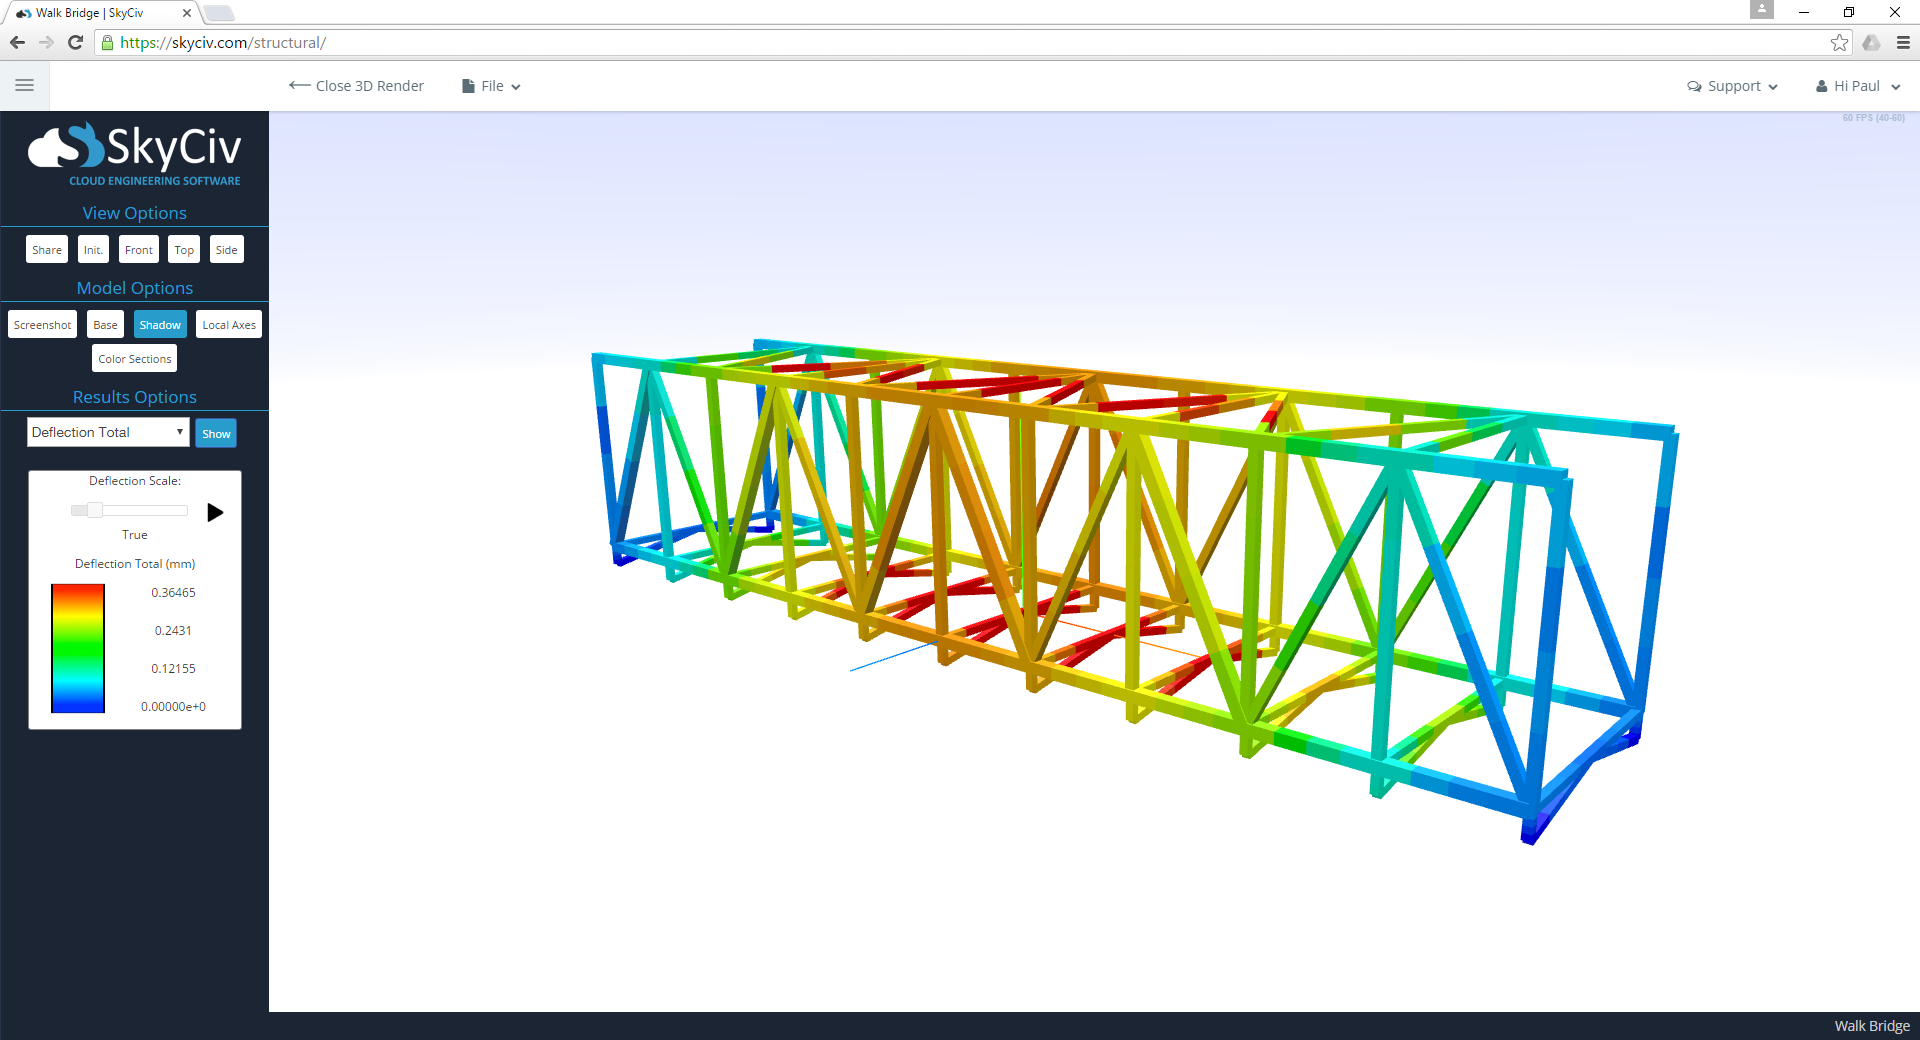 SkyCiv Structural 3D Software - 3D rendering of structures with color contours